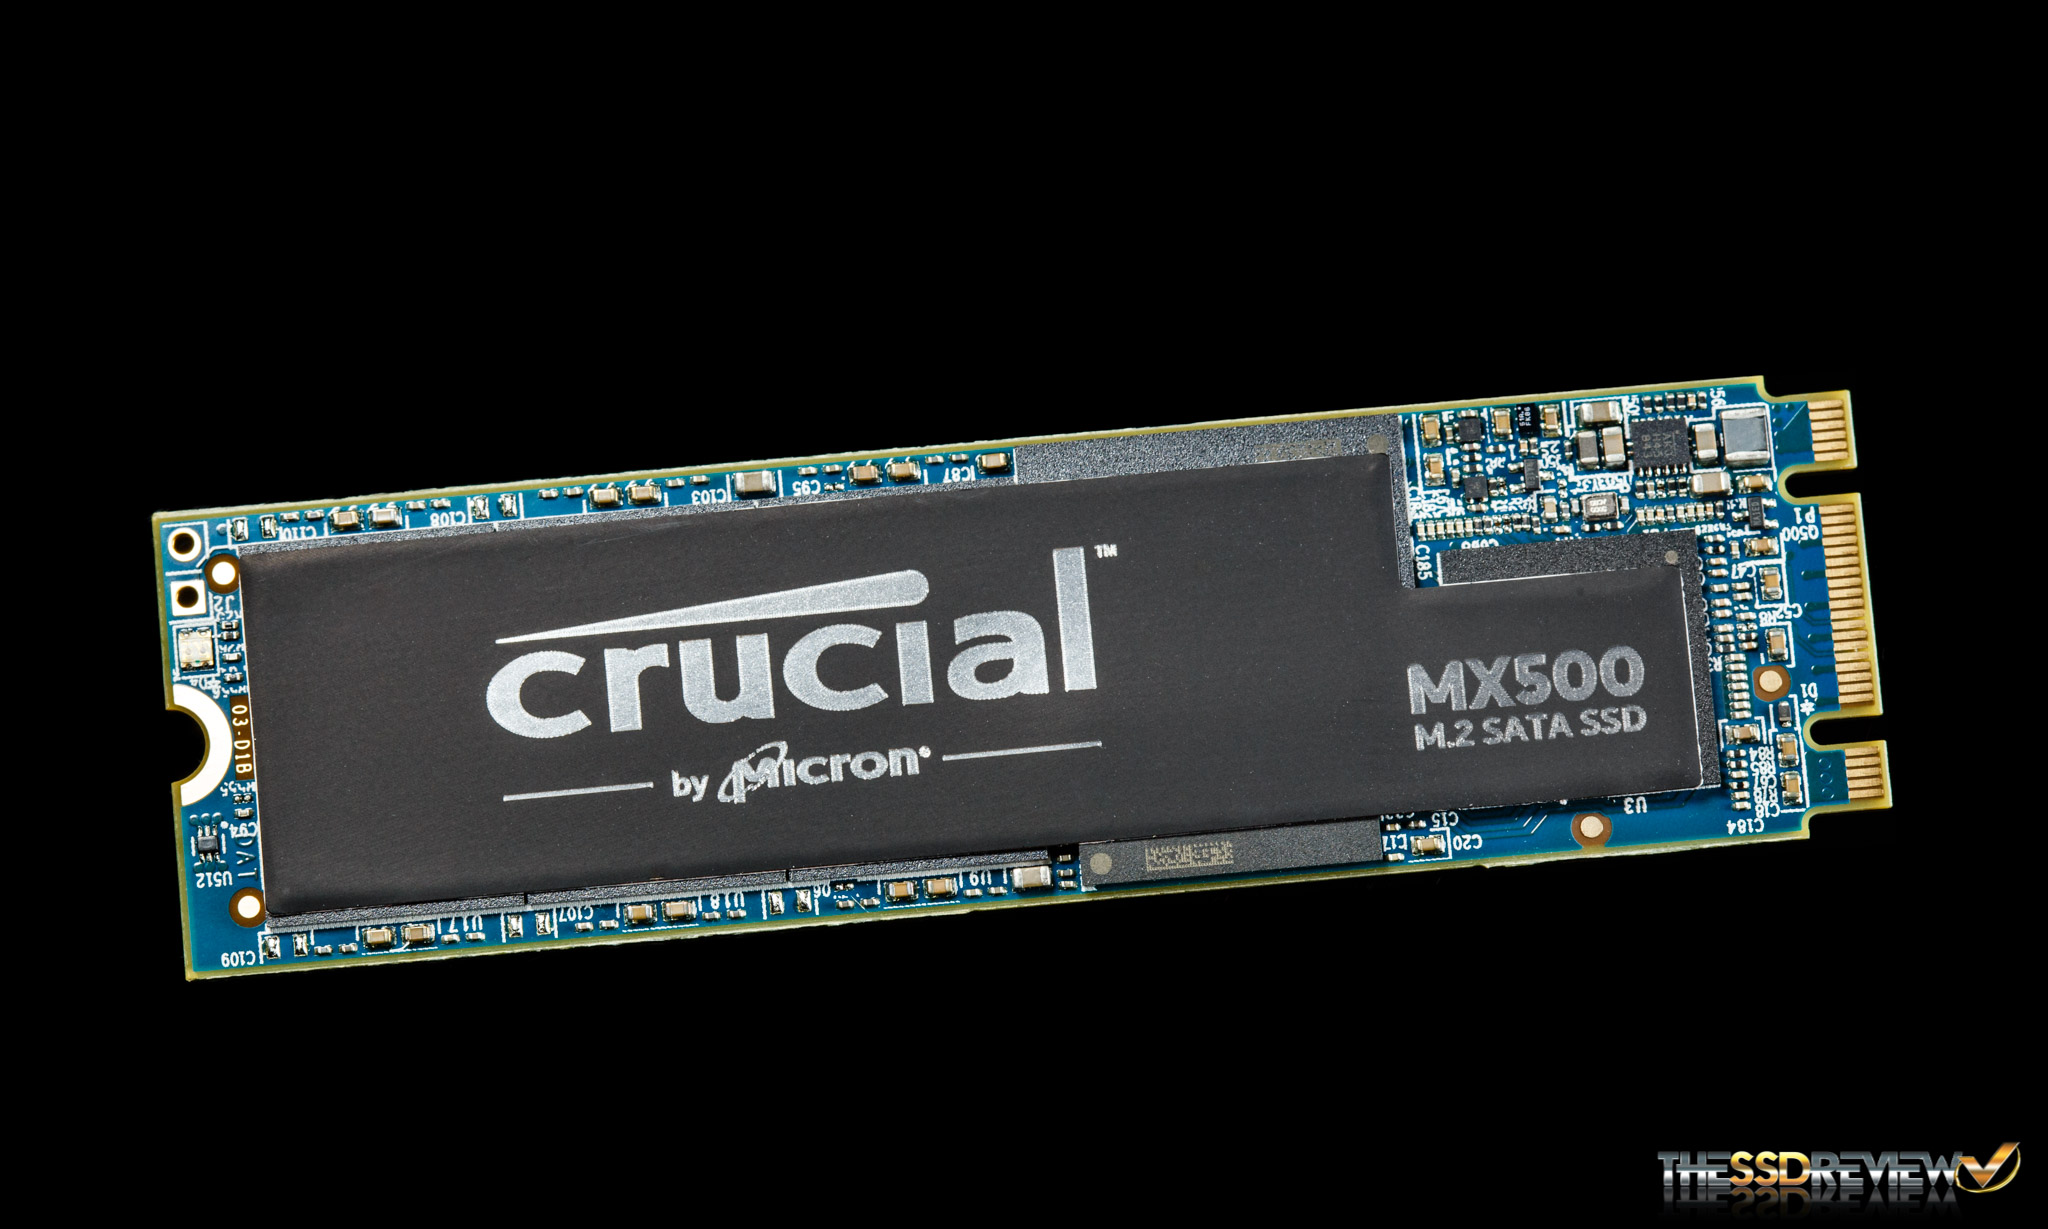 Crucial Mx500 M 2 Sata Ssd Review 500gb The Ssd Review